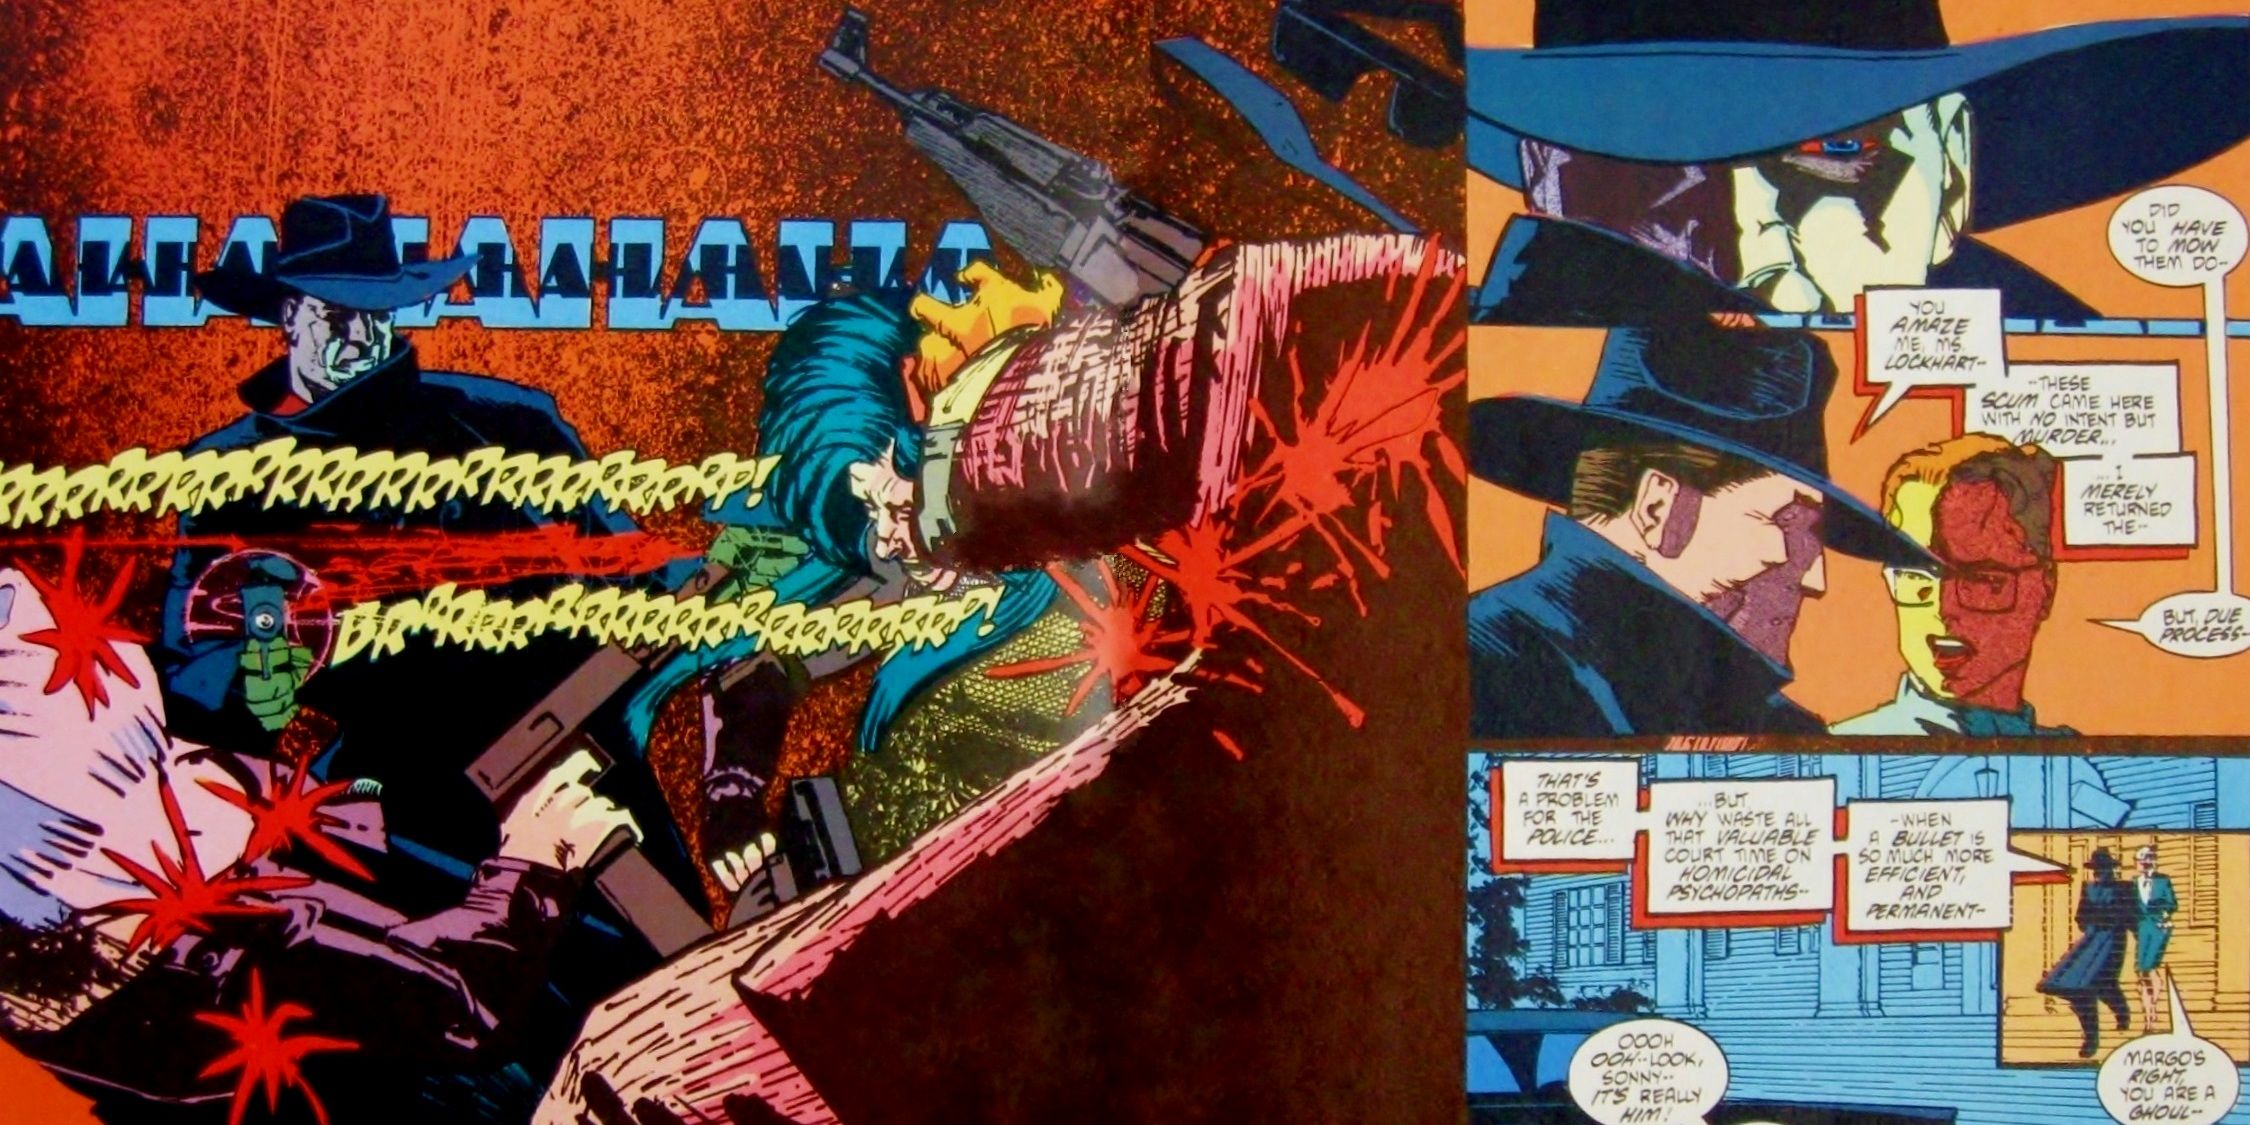 The Shadow: Blood and Judgment, by Howard Chaykin